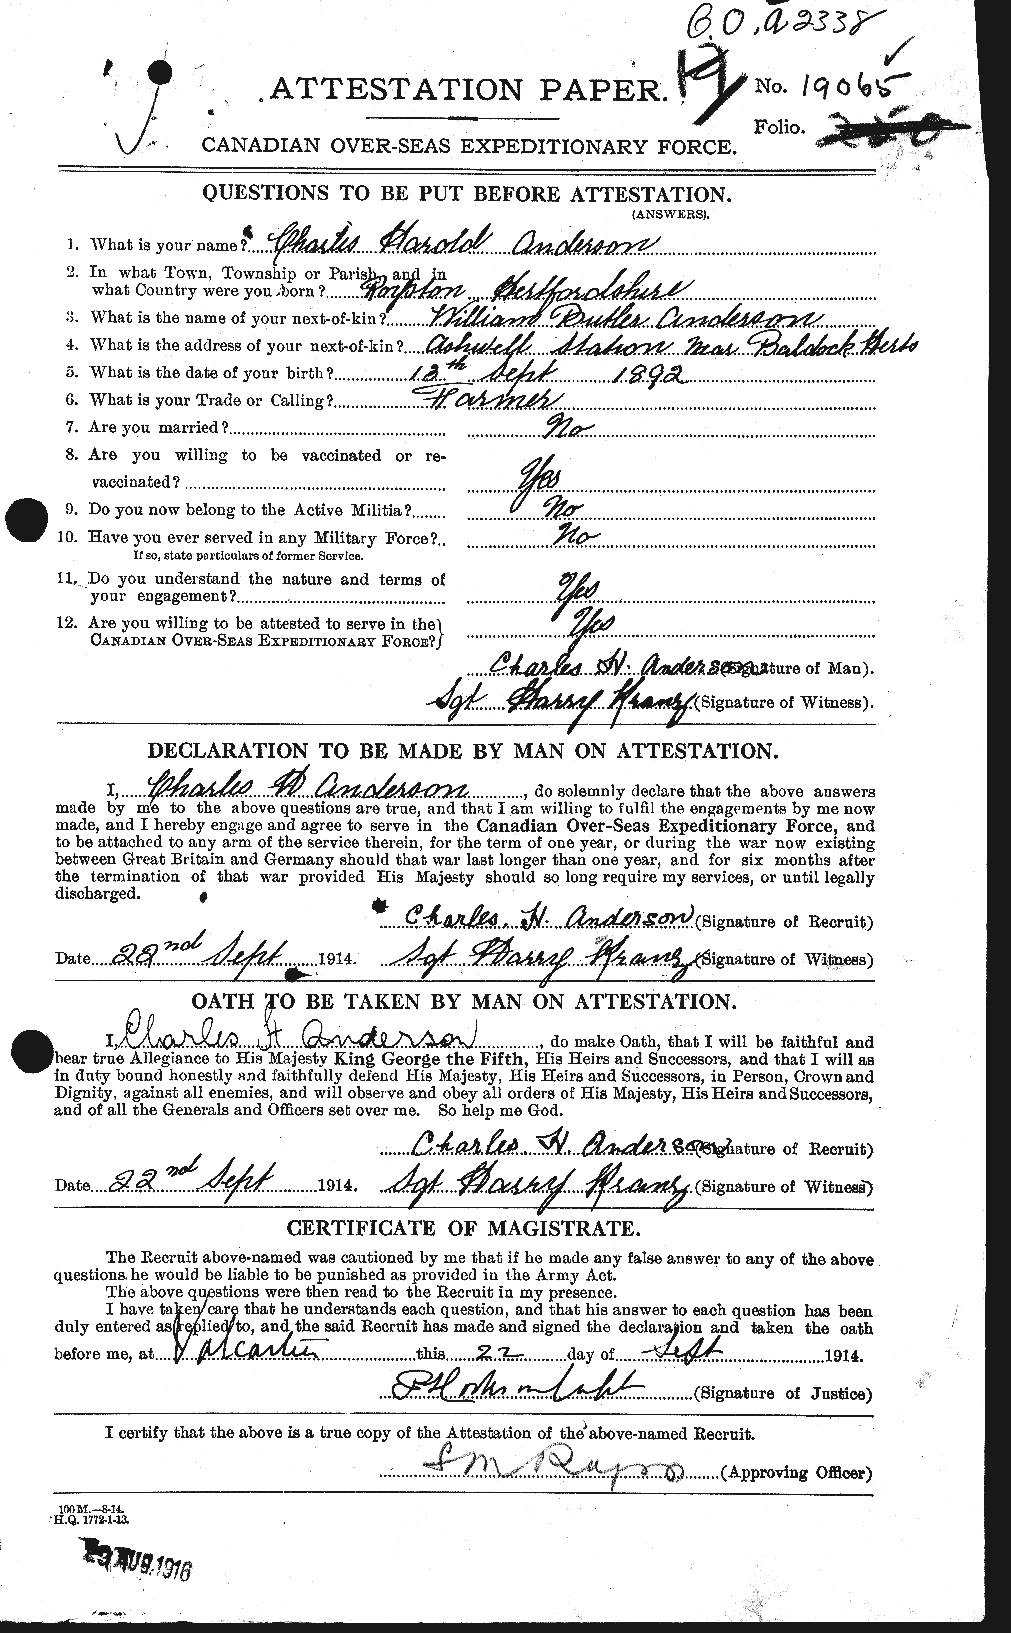 Personnel Records of the First World War - CEF 209238a